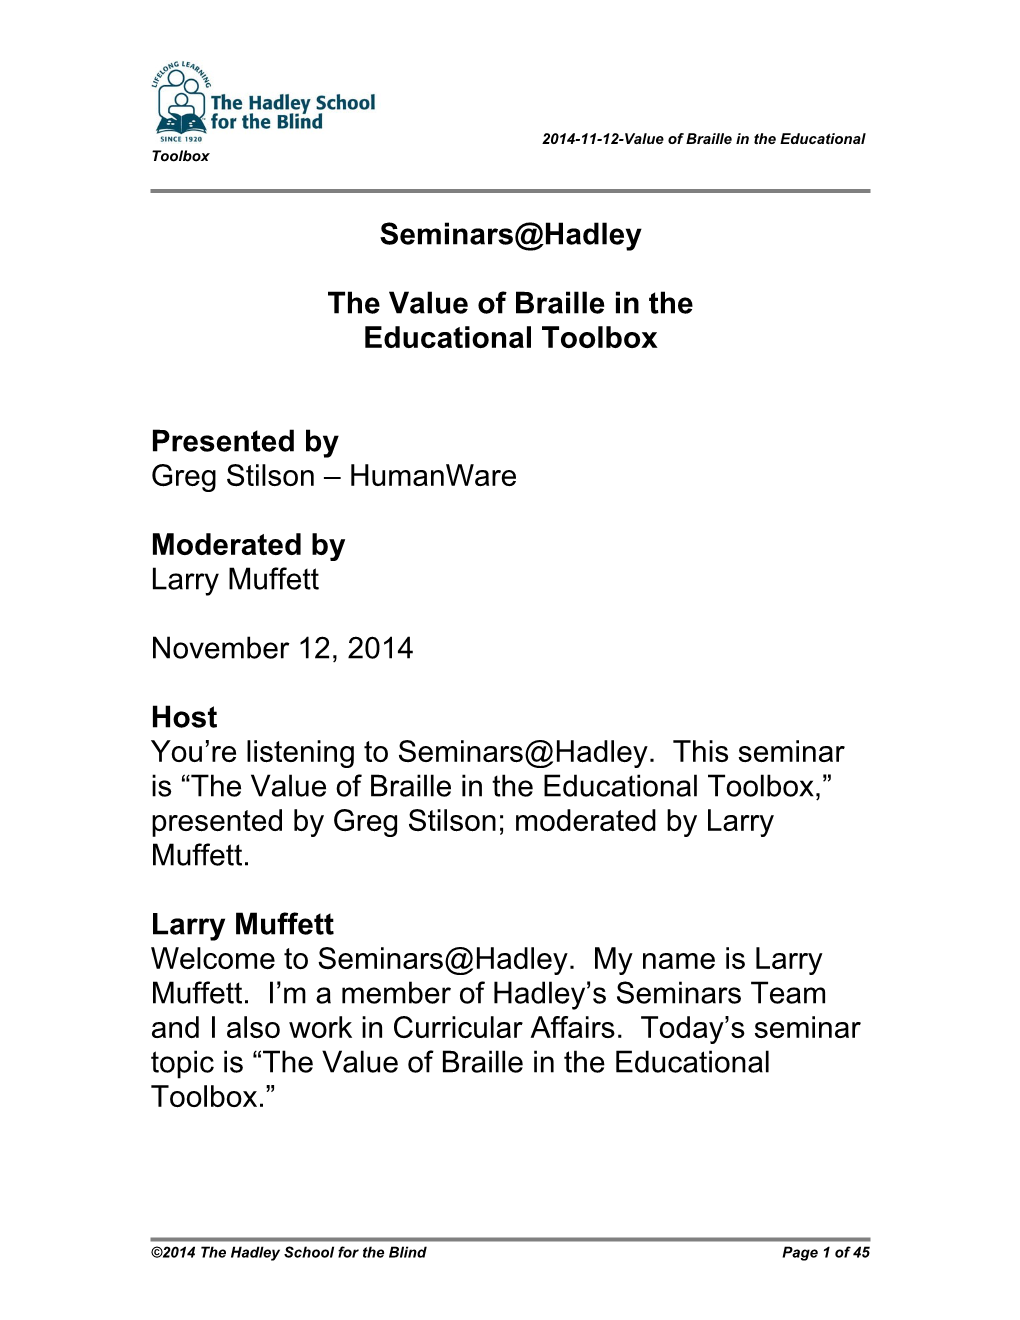 2014-11-12-The Value of Braille in the Educational Toolbox